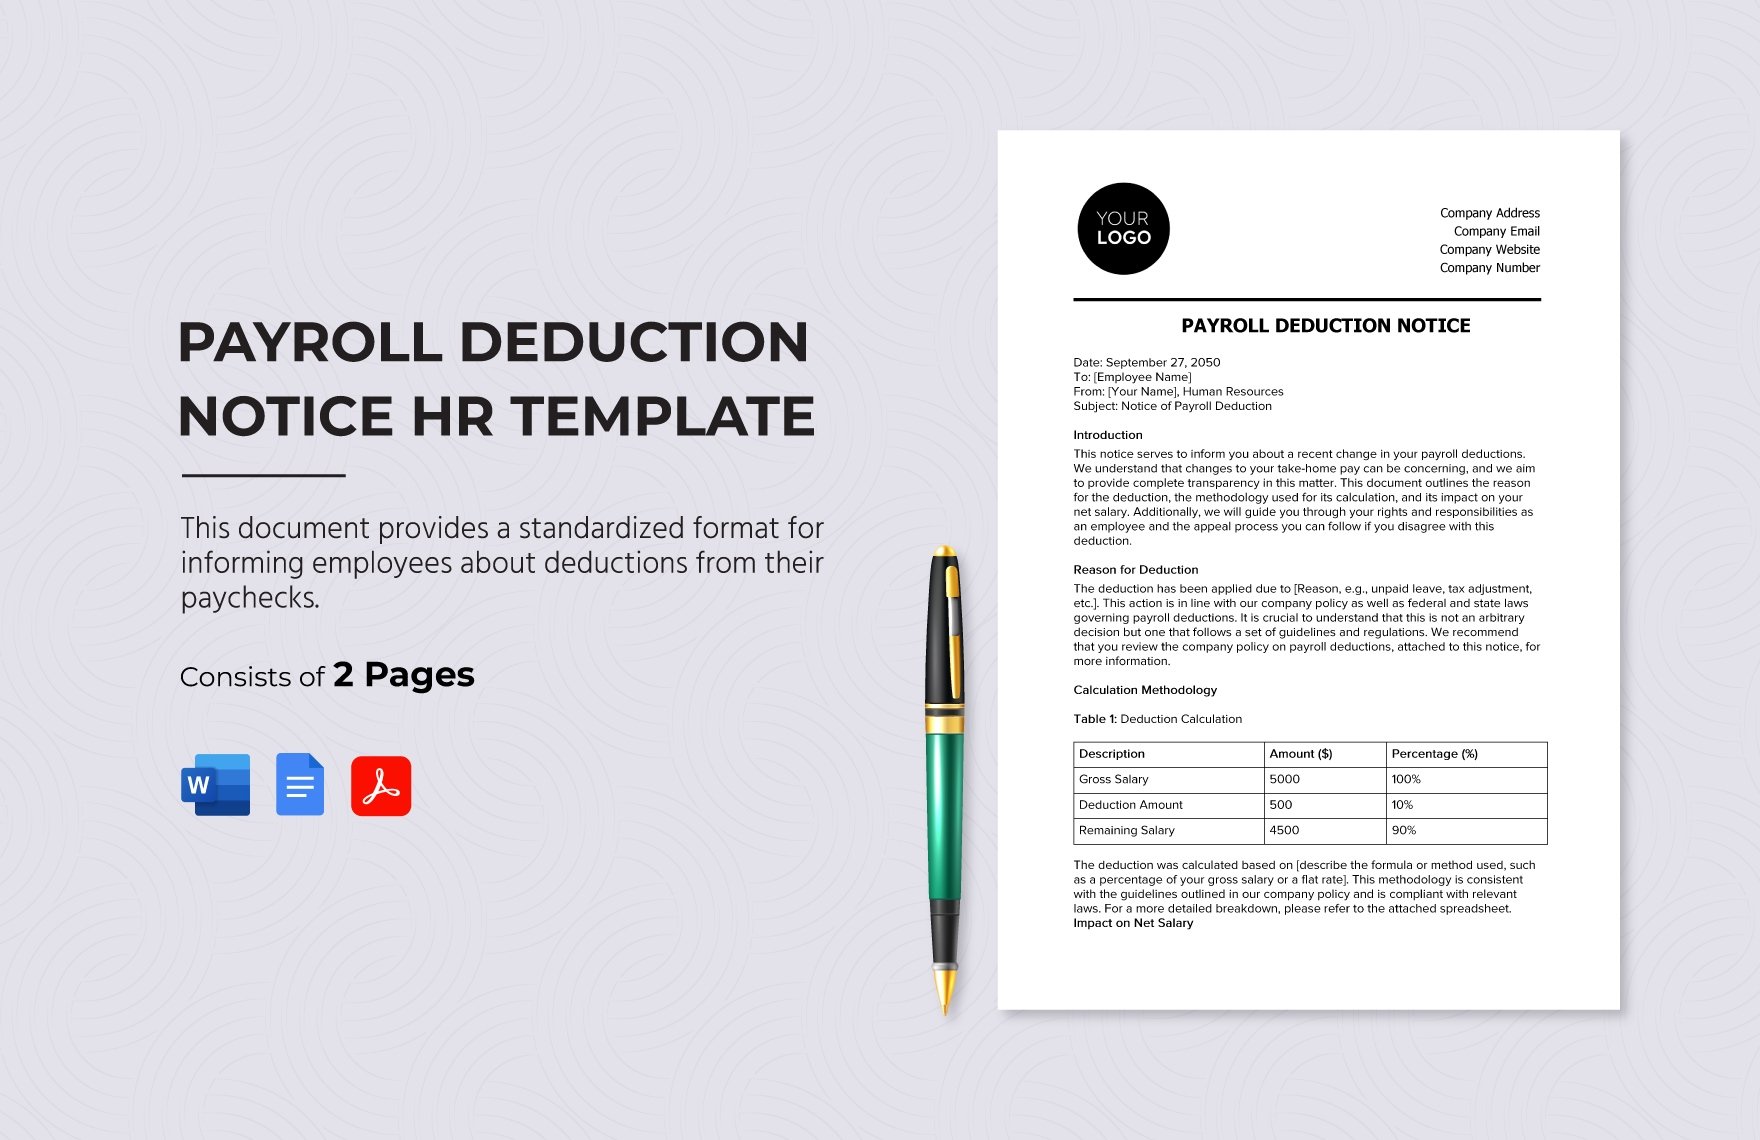 Payroll Deduction Notice HR Template